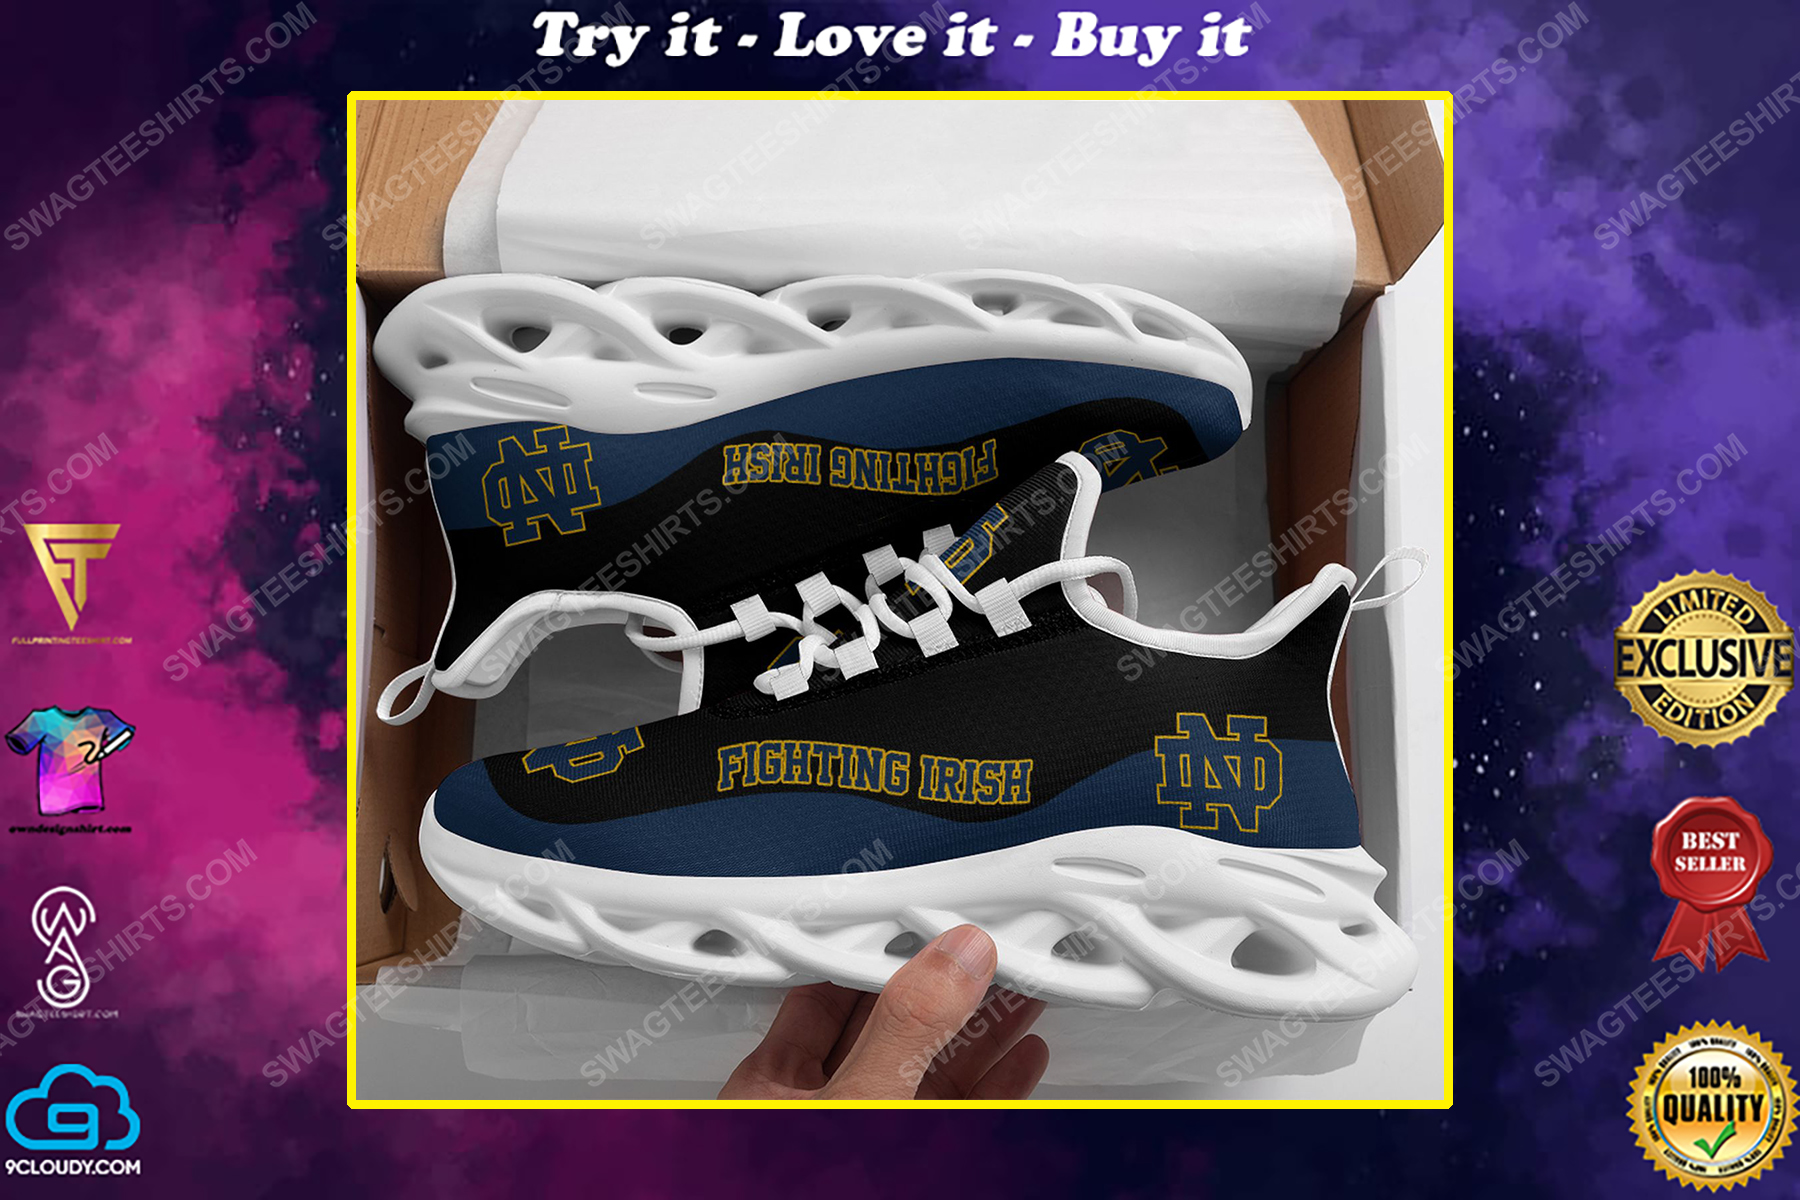 The notre dame fighting irish football team max soul shoes